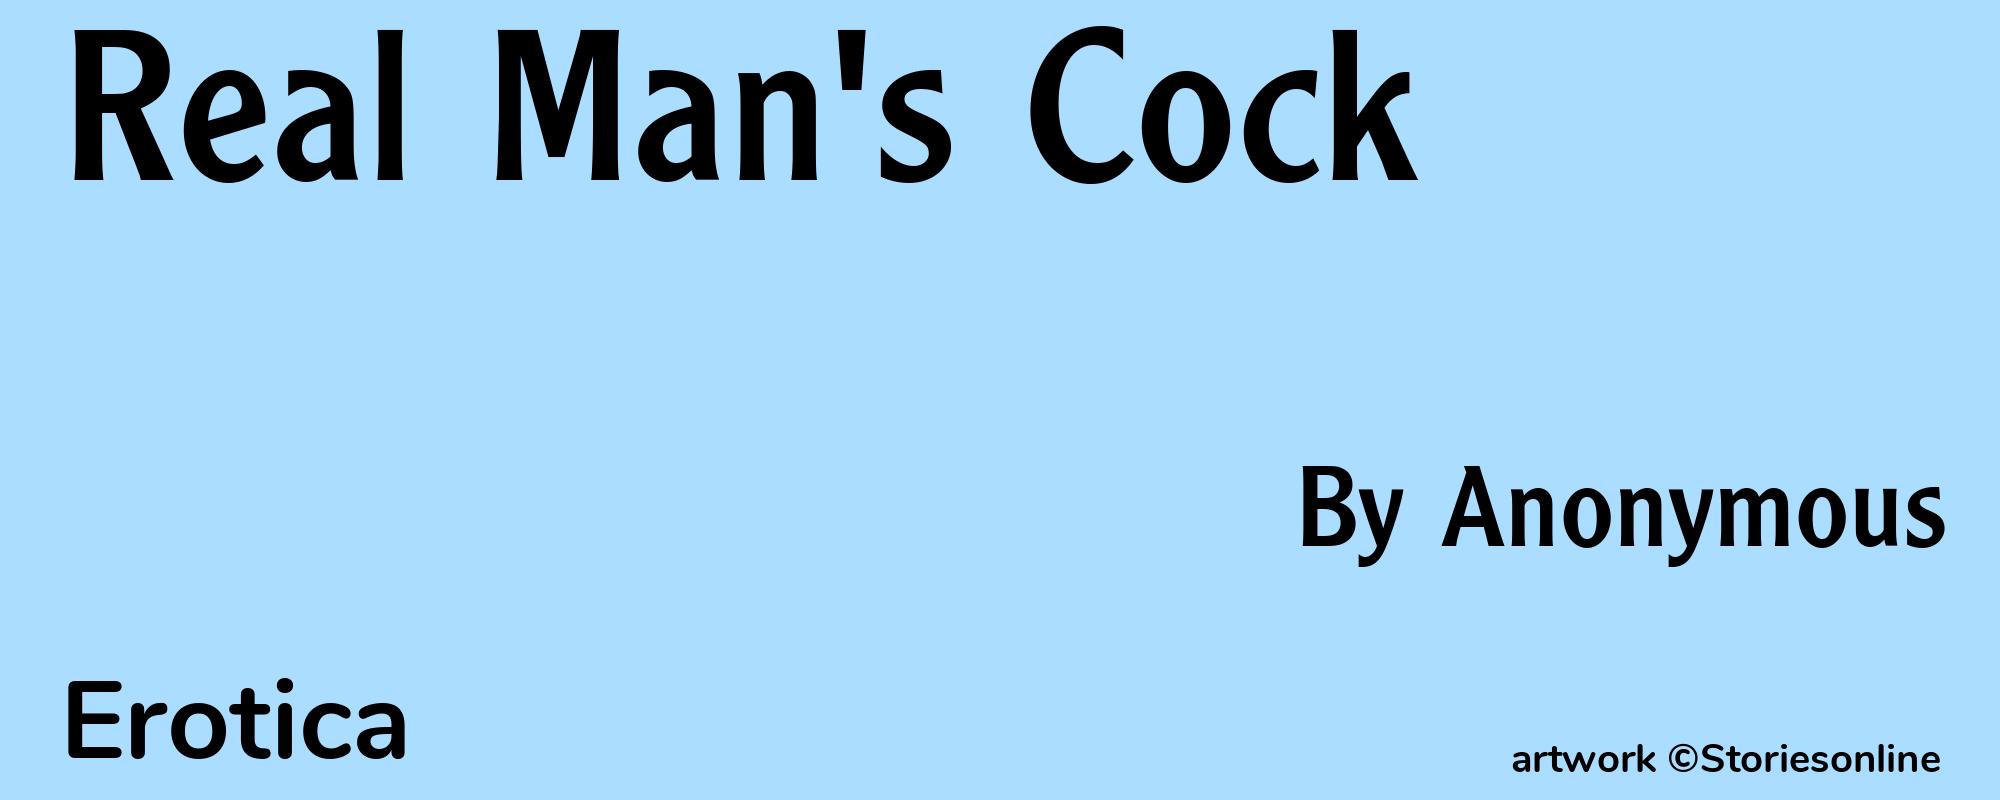 Real Man's Cock - Cover